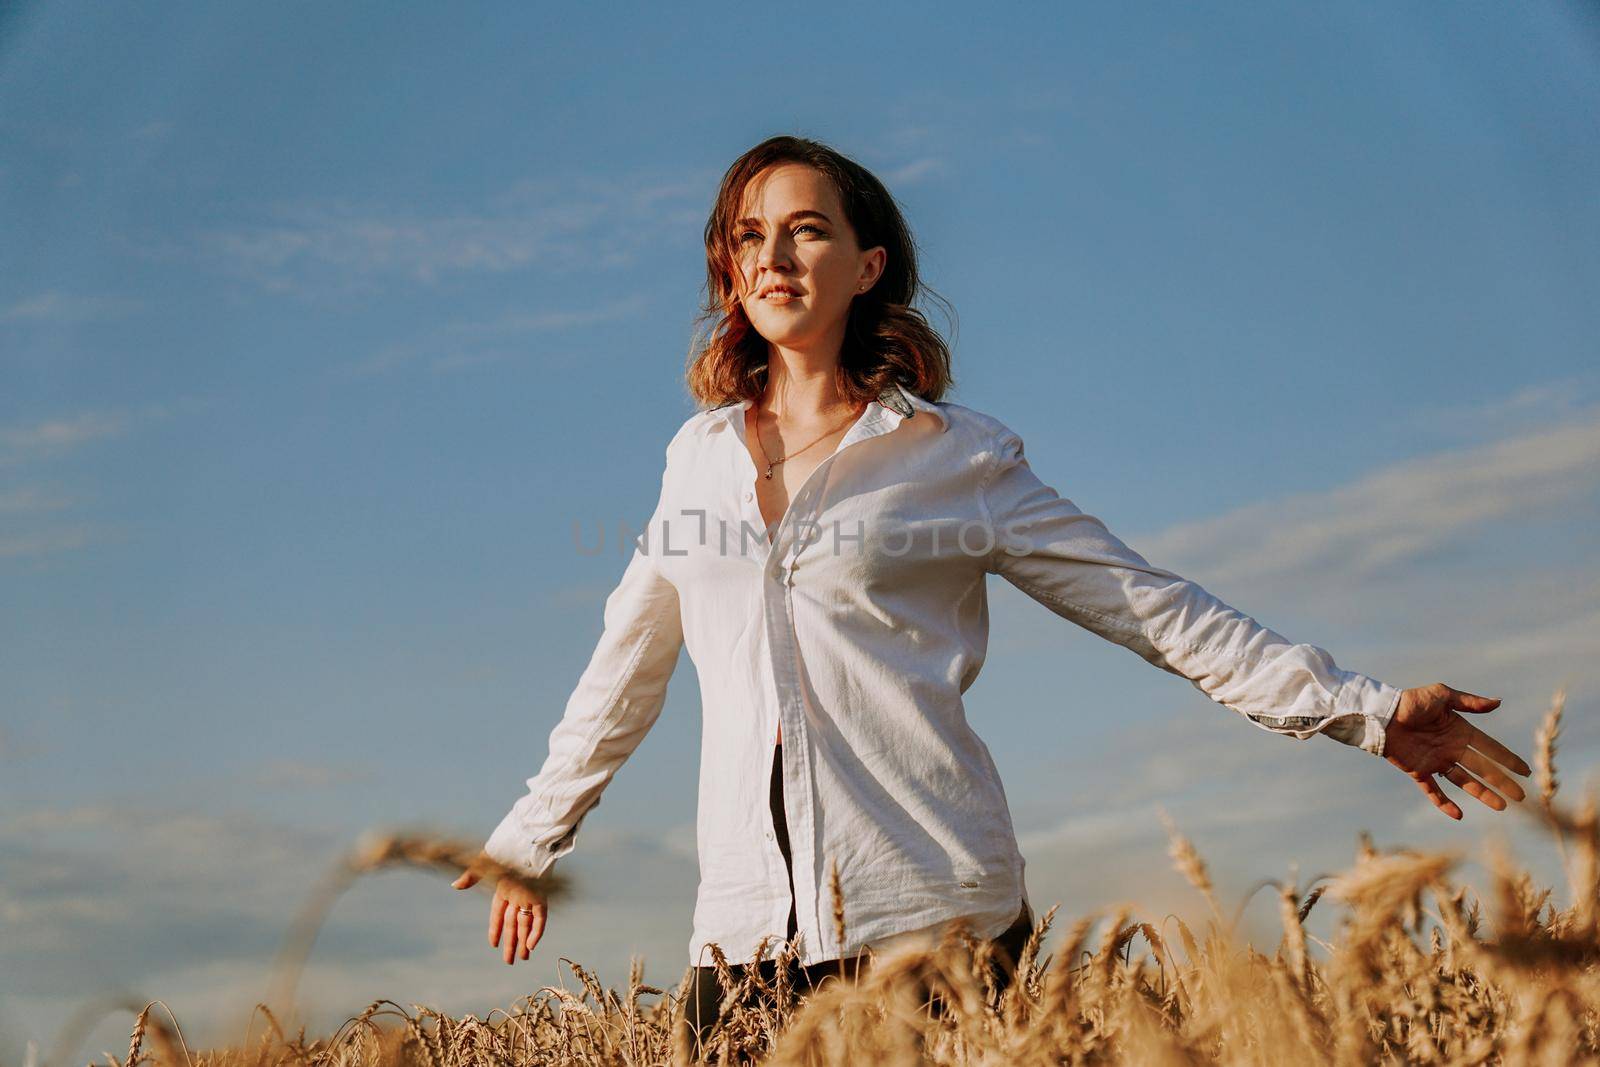 Happy young woman in a white shirt in a wheat field. Sunny day. Girl smiling, happiness concept. Hands to the side